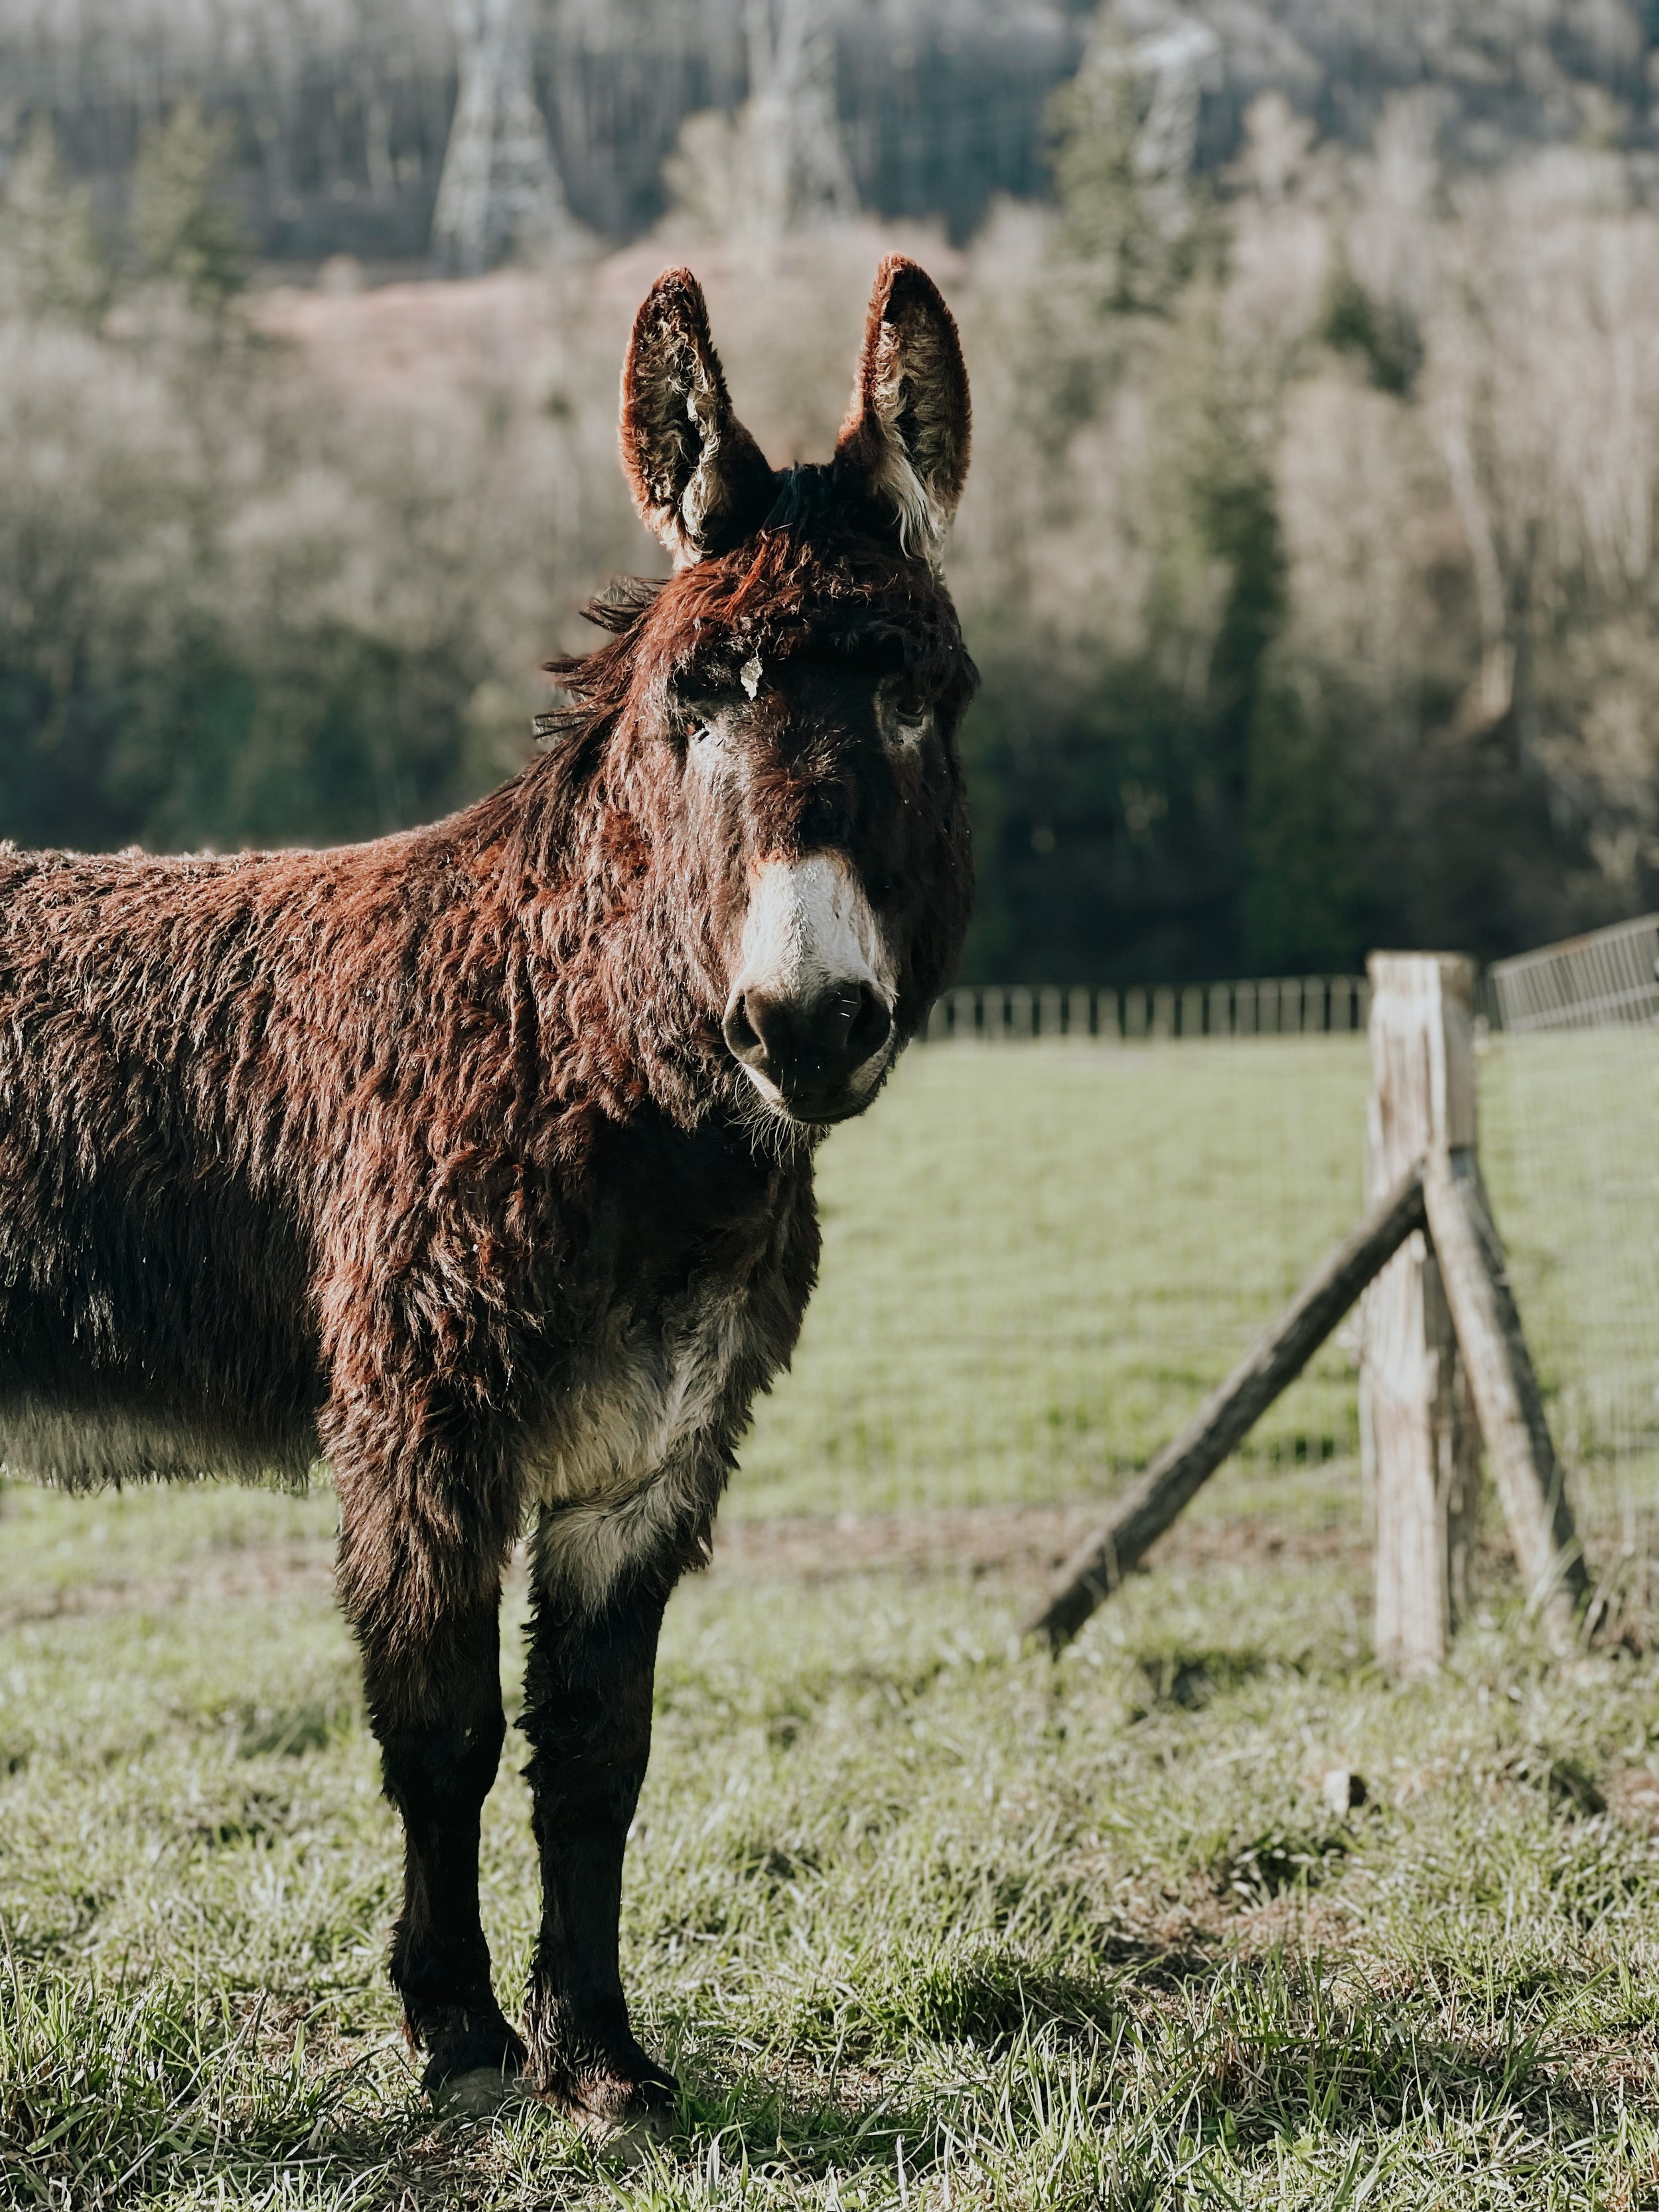   Meet Gus! Our guardian donkey. He came to us very shy and standoffish but now loves pets and treats from our family and customers. He really does not like our pigs though!  